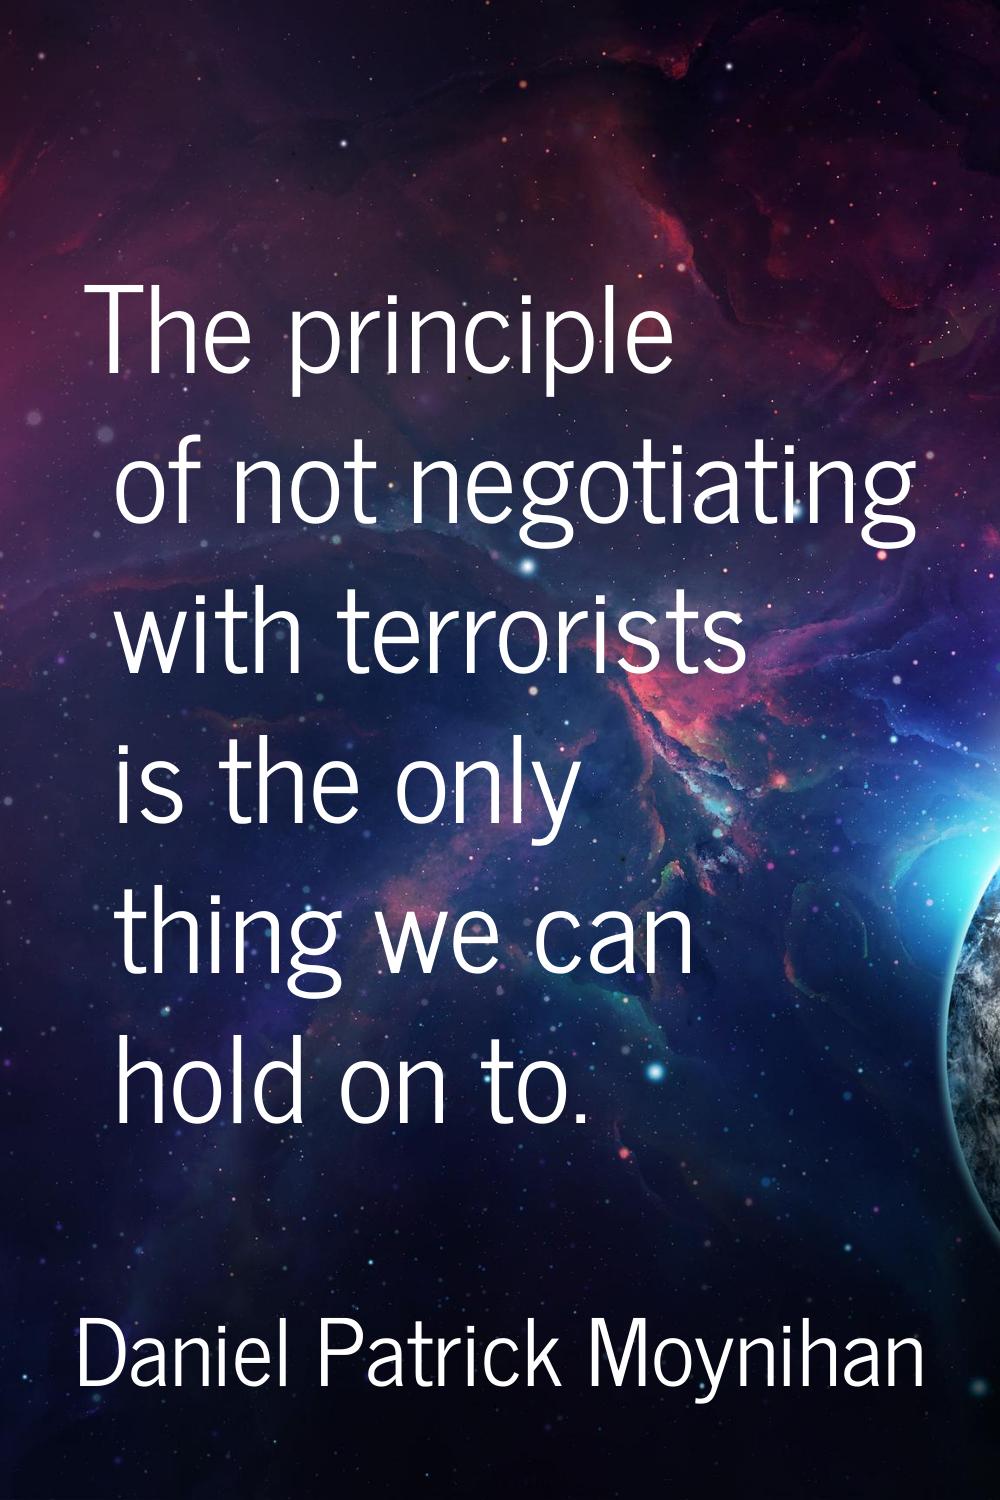 The principle of not negotiating with terrorists is the only thing we can hold on to.